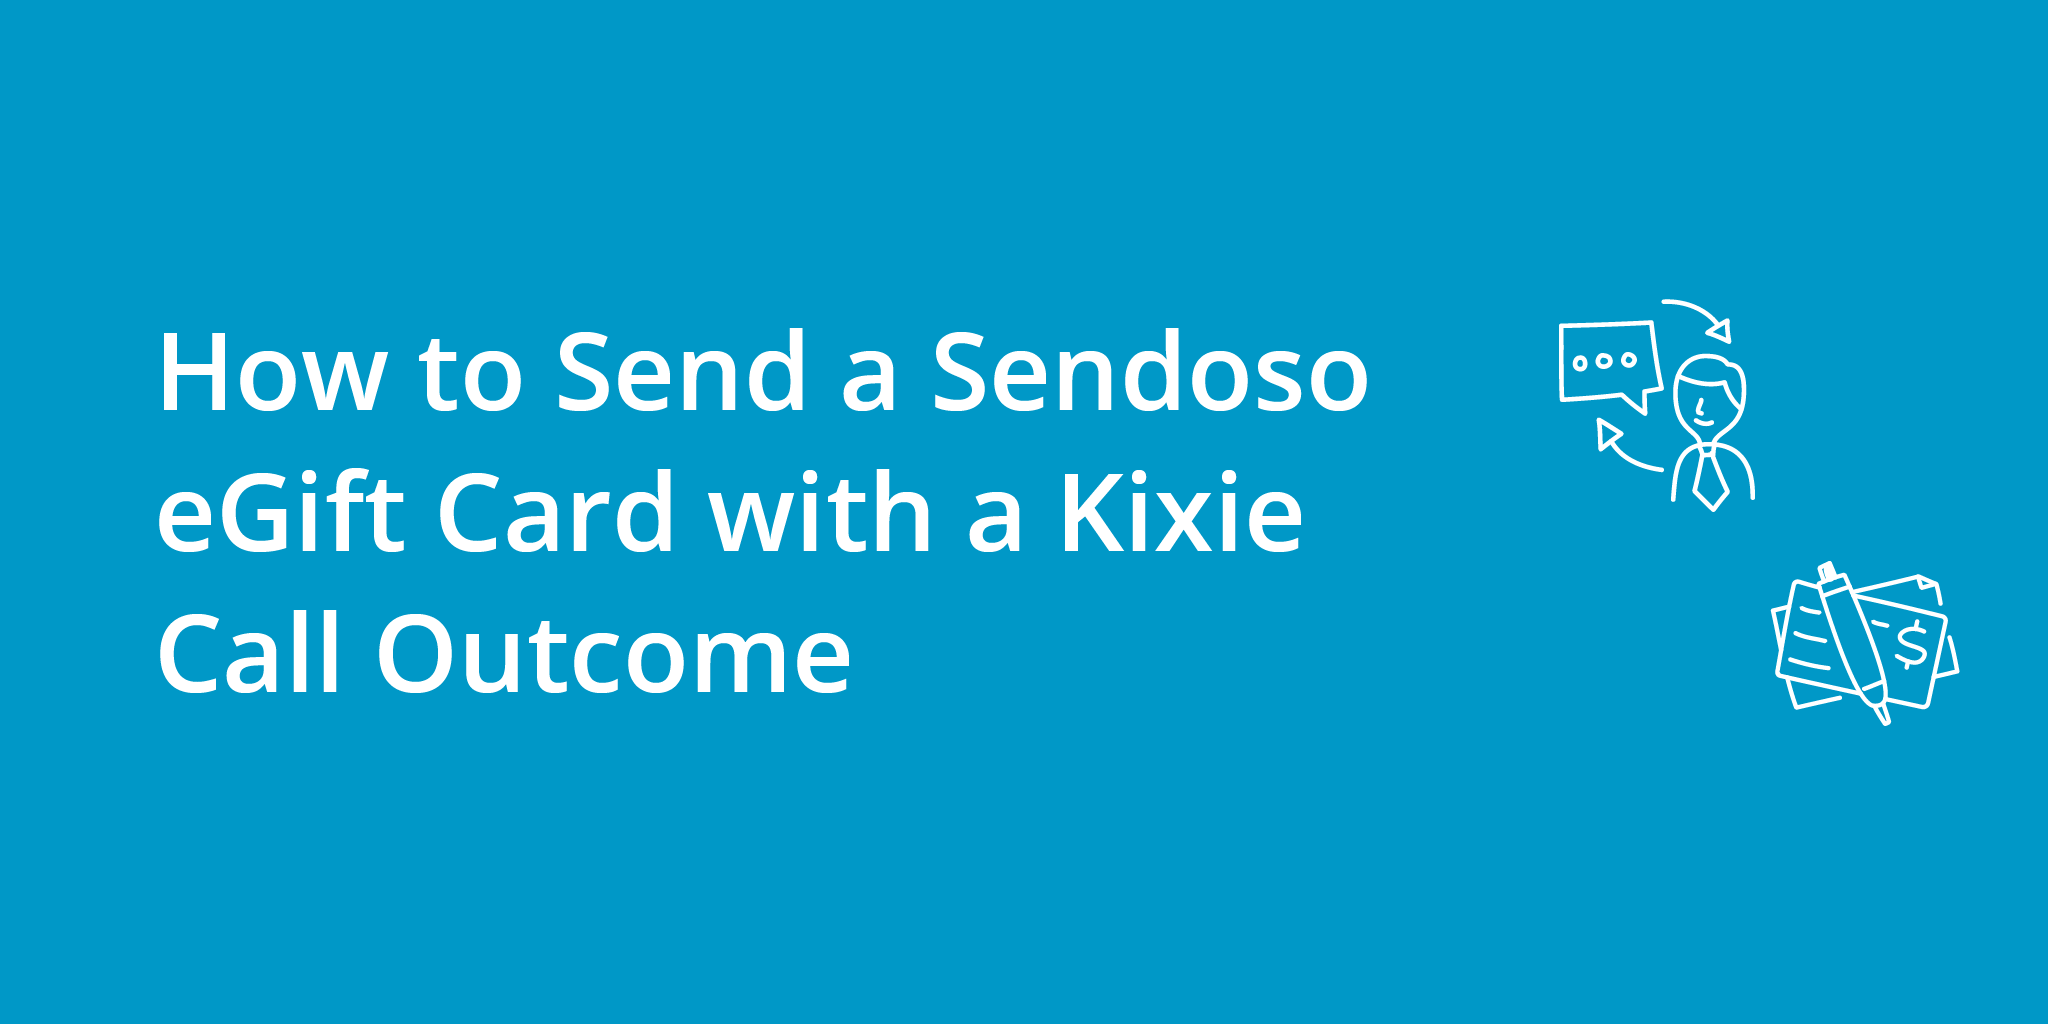 How to Send a Sendoso eGift Card with a Kixie Call Outcome | Telephones for business